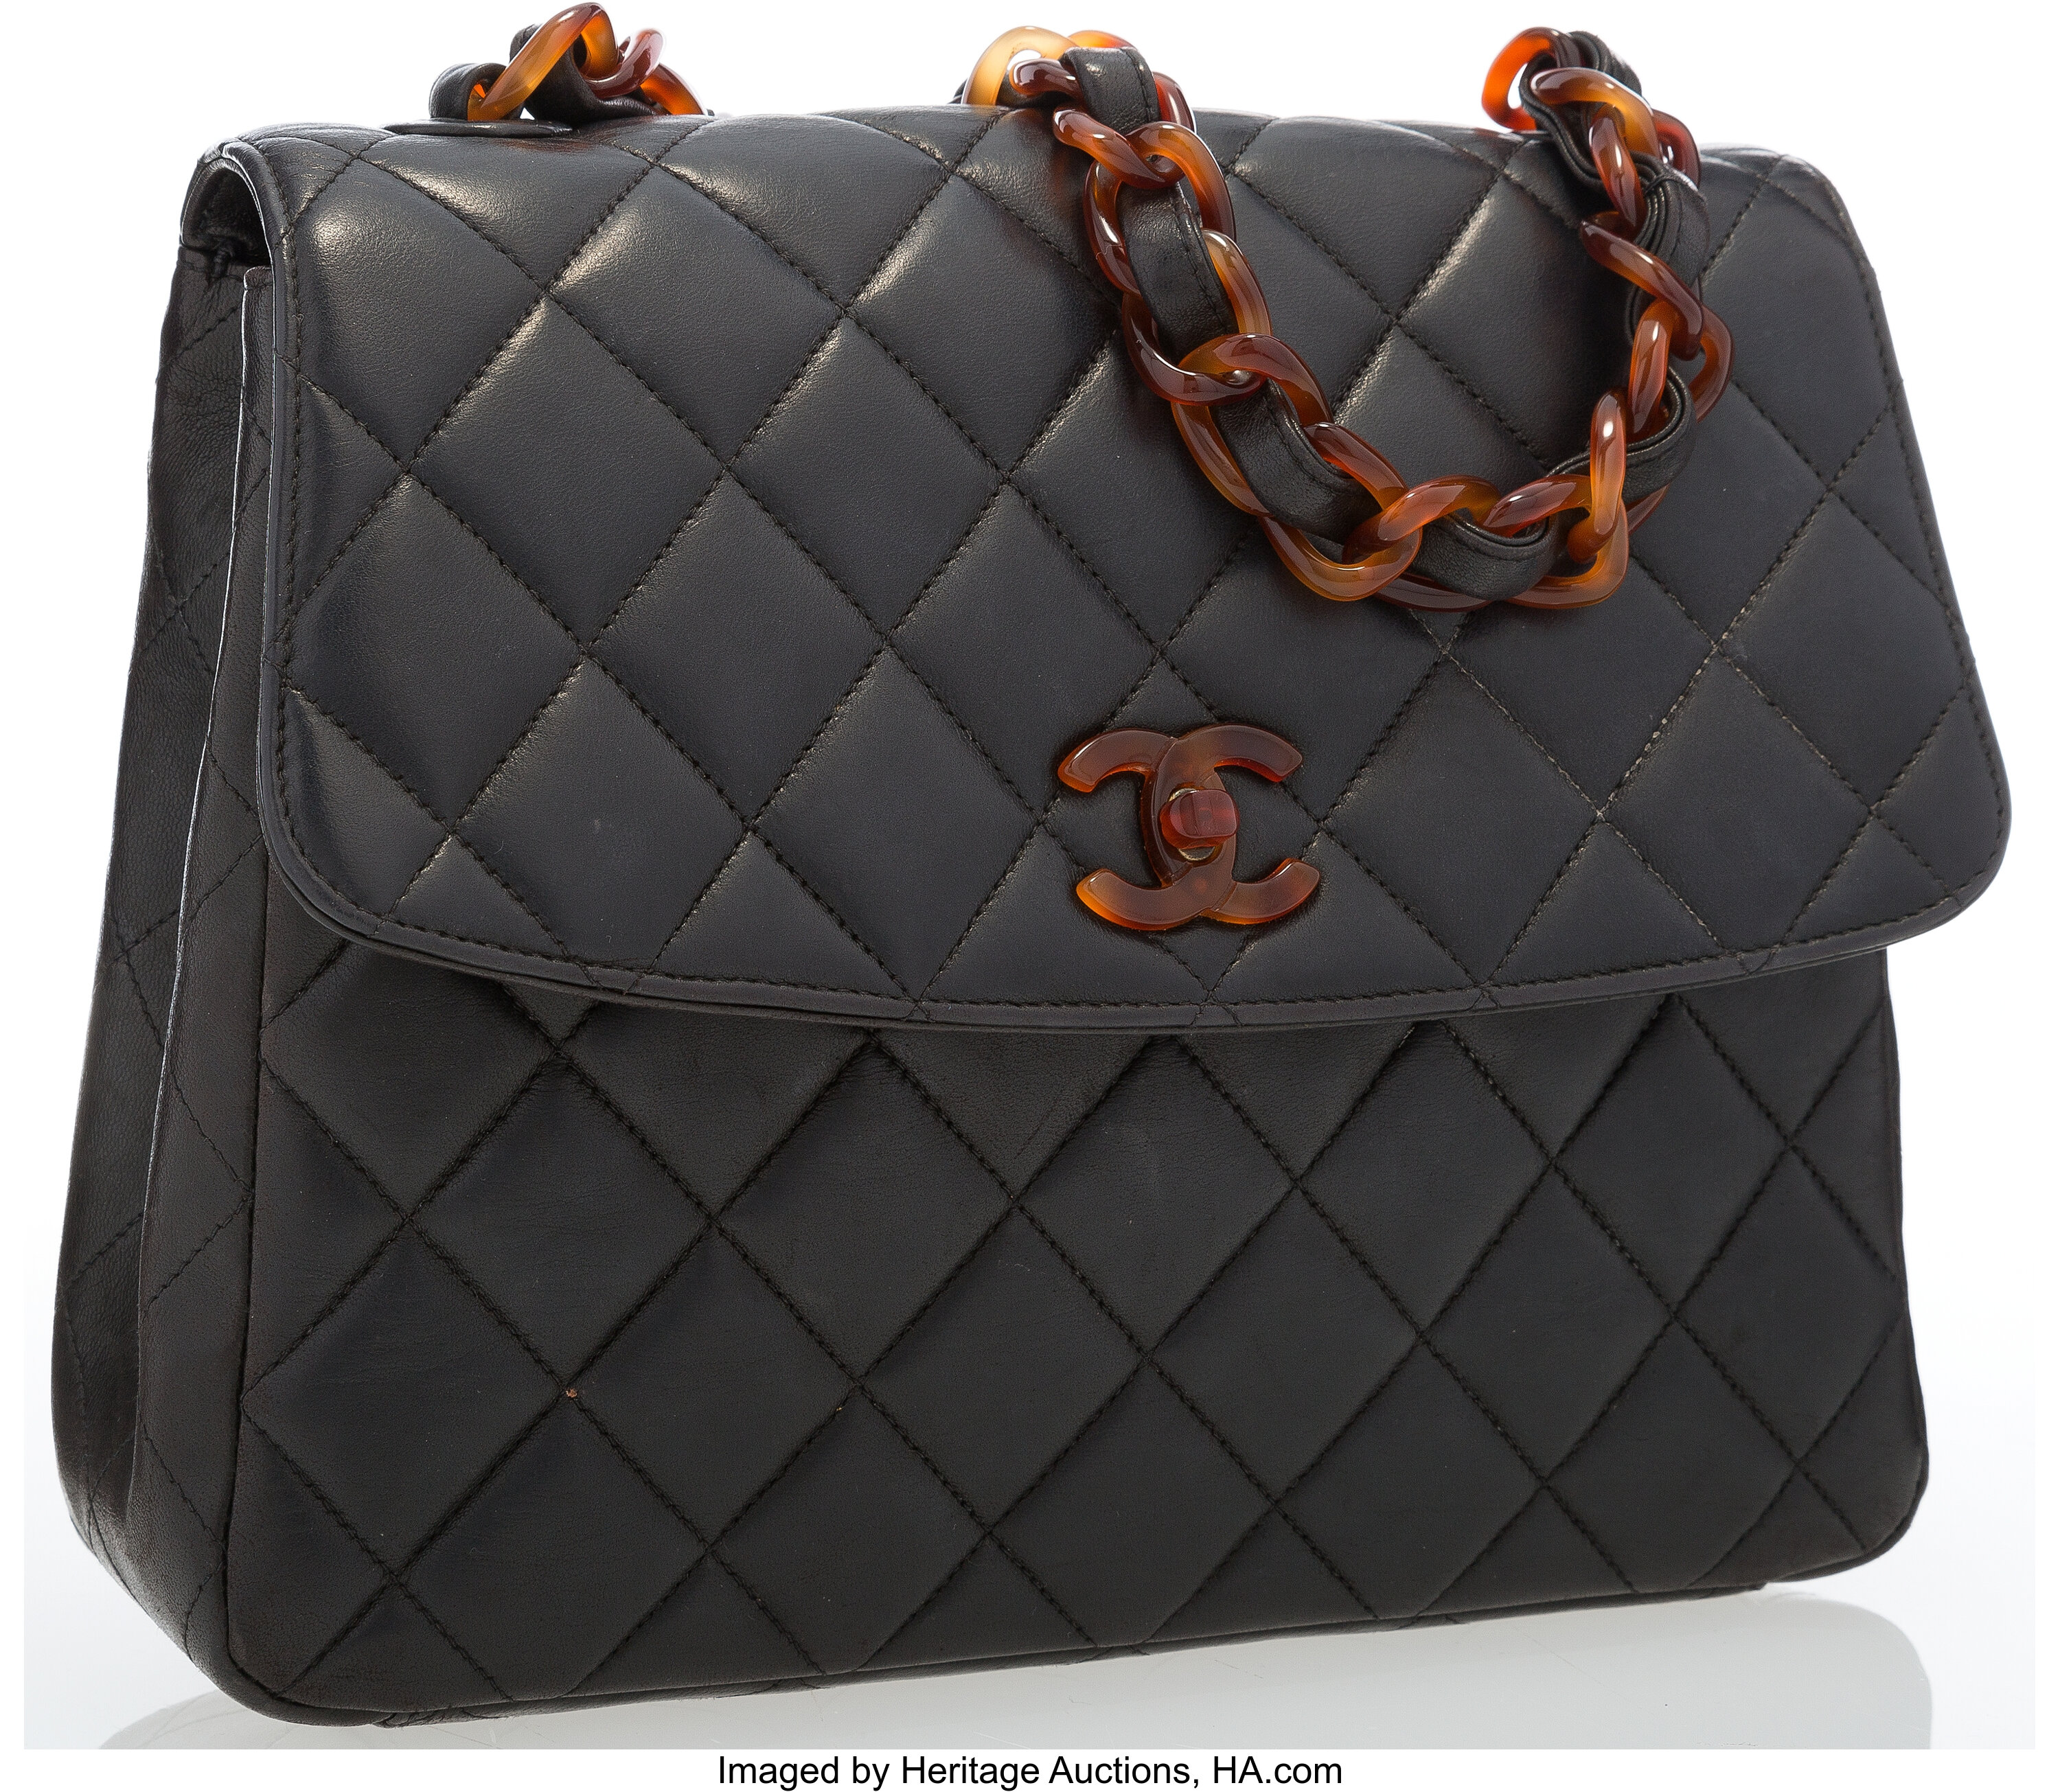 Chanel Navy Quilted Lambskin Leather Shoulder Bag with Tortoise